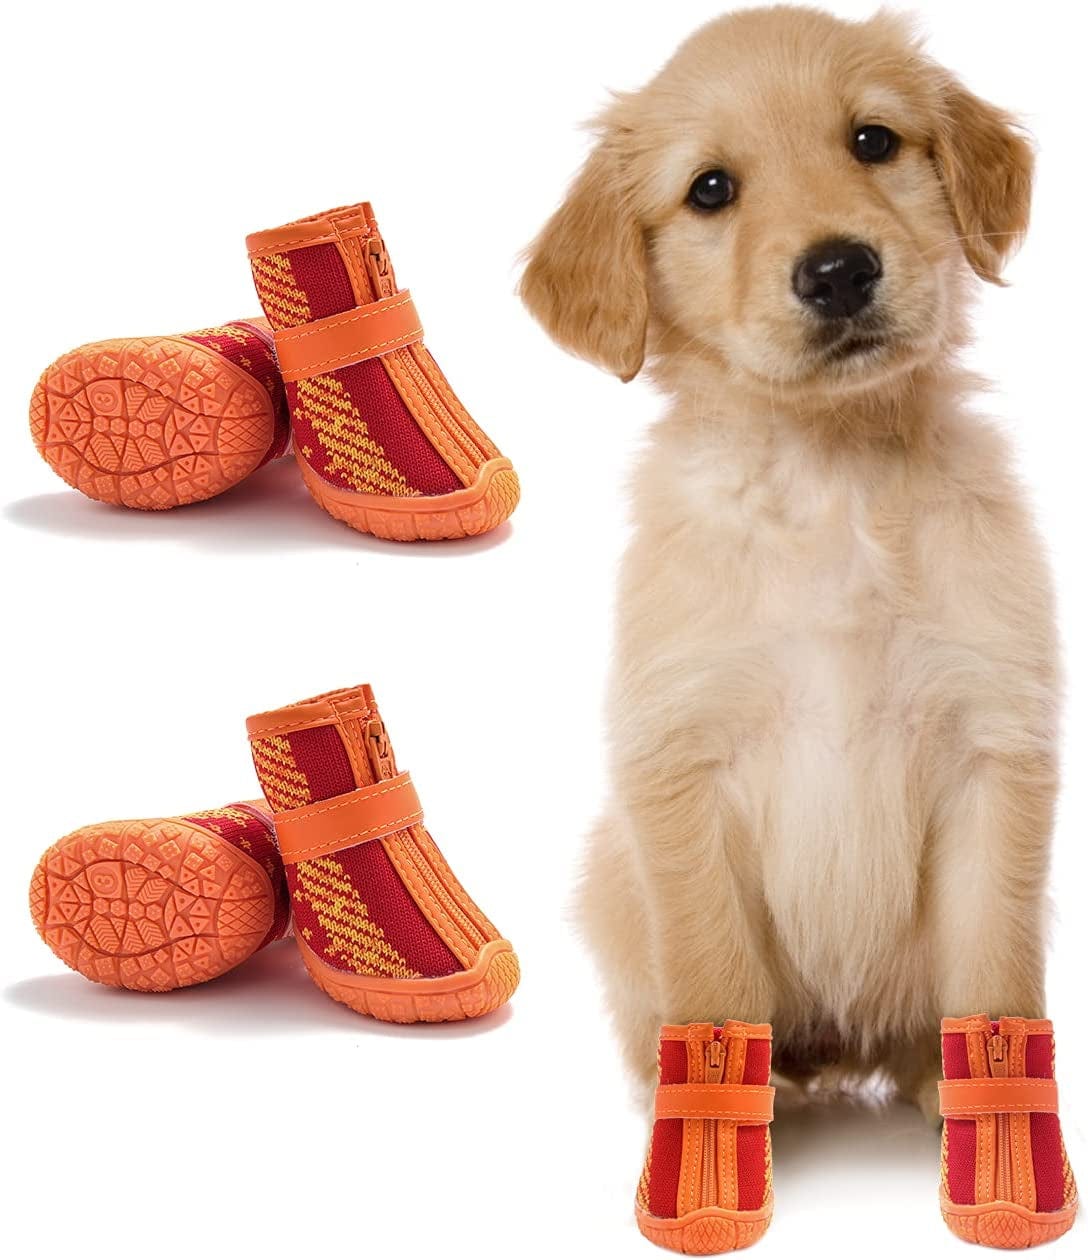 Buy KUTKUT Dog Shoes for Hardwood Floors, Breathable Dog Boots with  Anti-Slip Rugged Sole, Summer Dog Booties